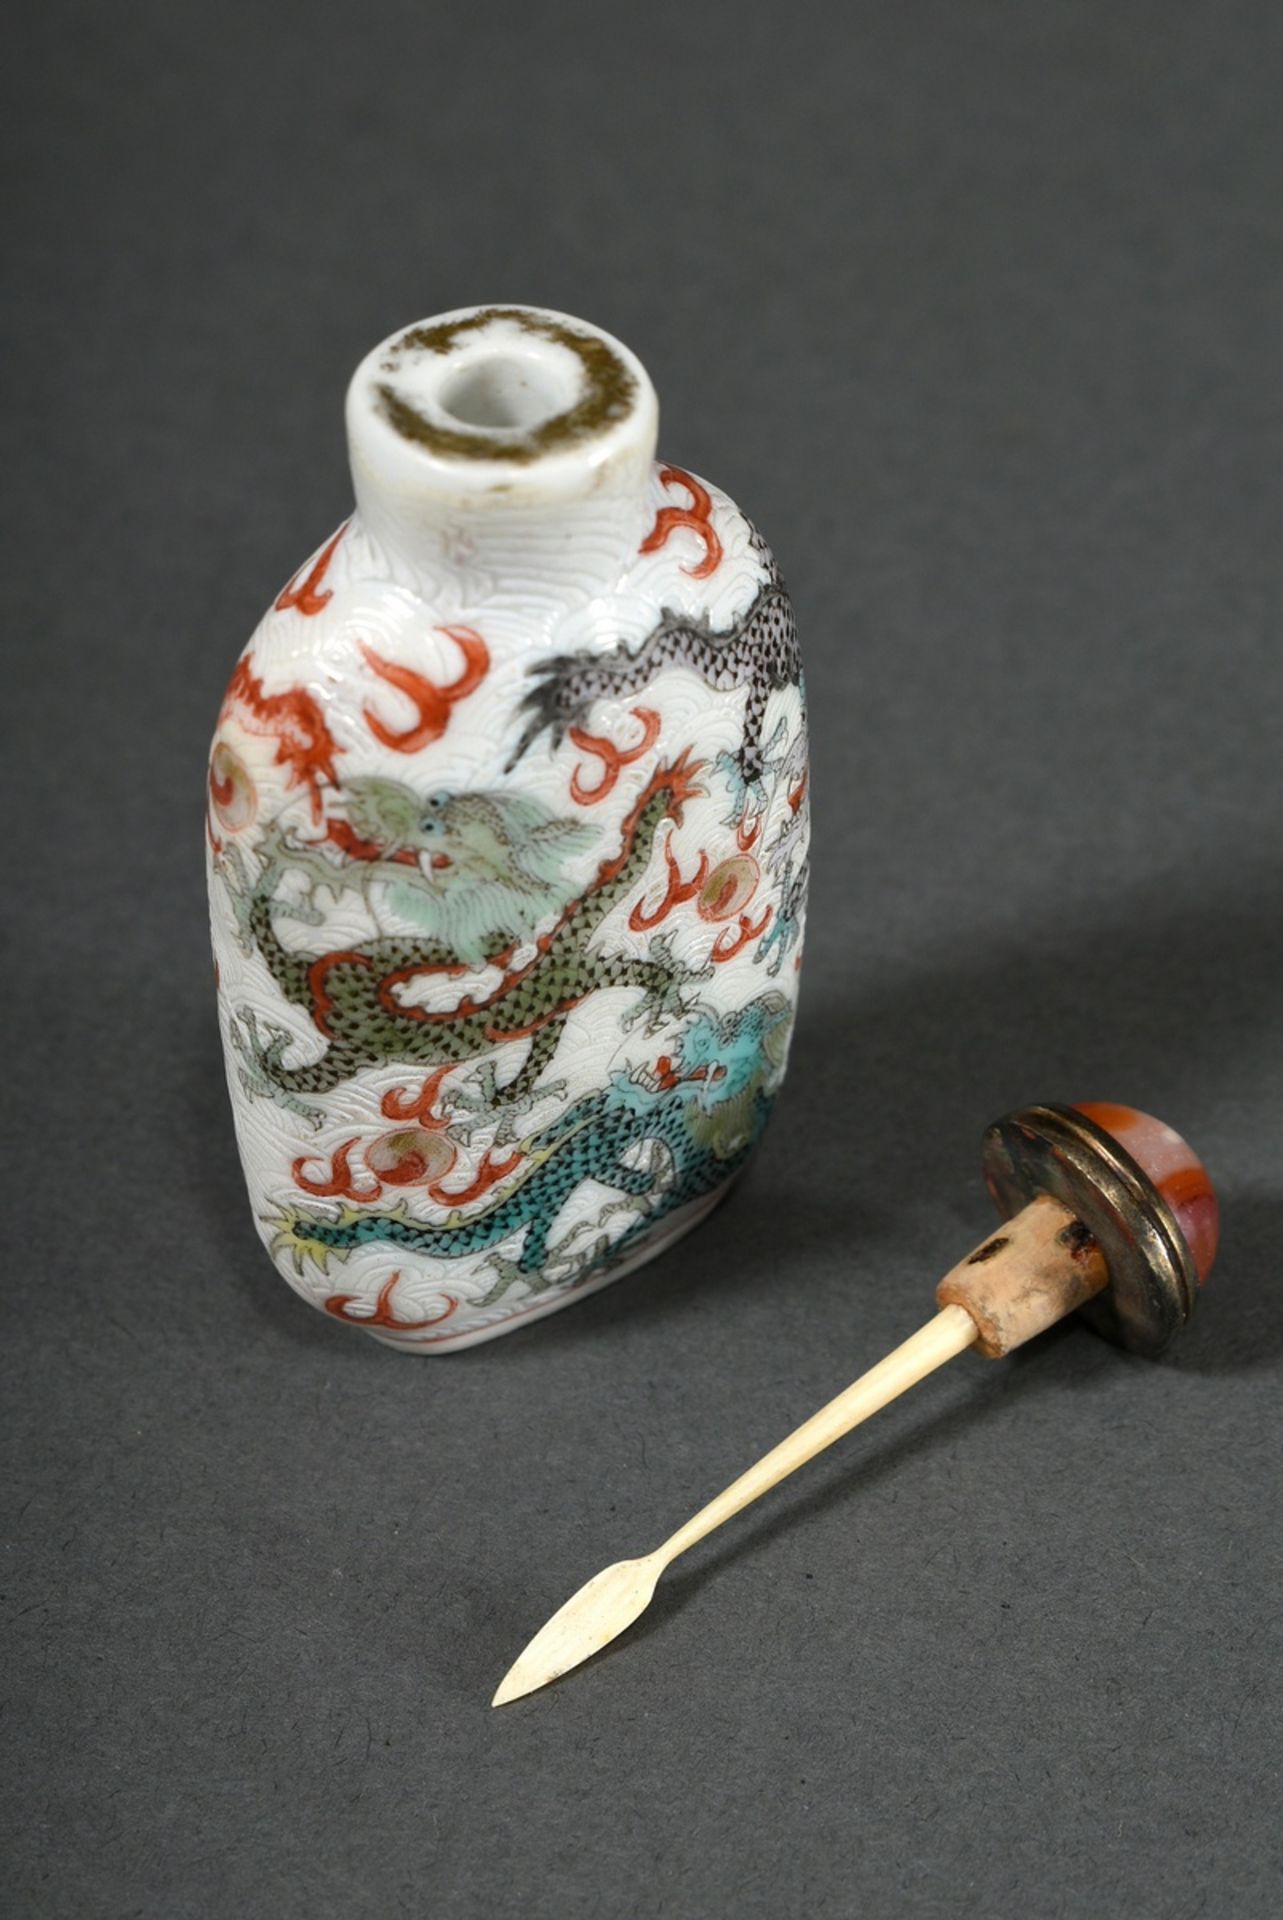 Fine porcelain snuffbottle with five "5-toed celestial dragons with flaming pearls" and waves sgraf - Image 3 of 4